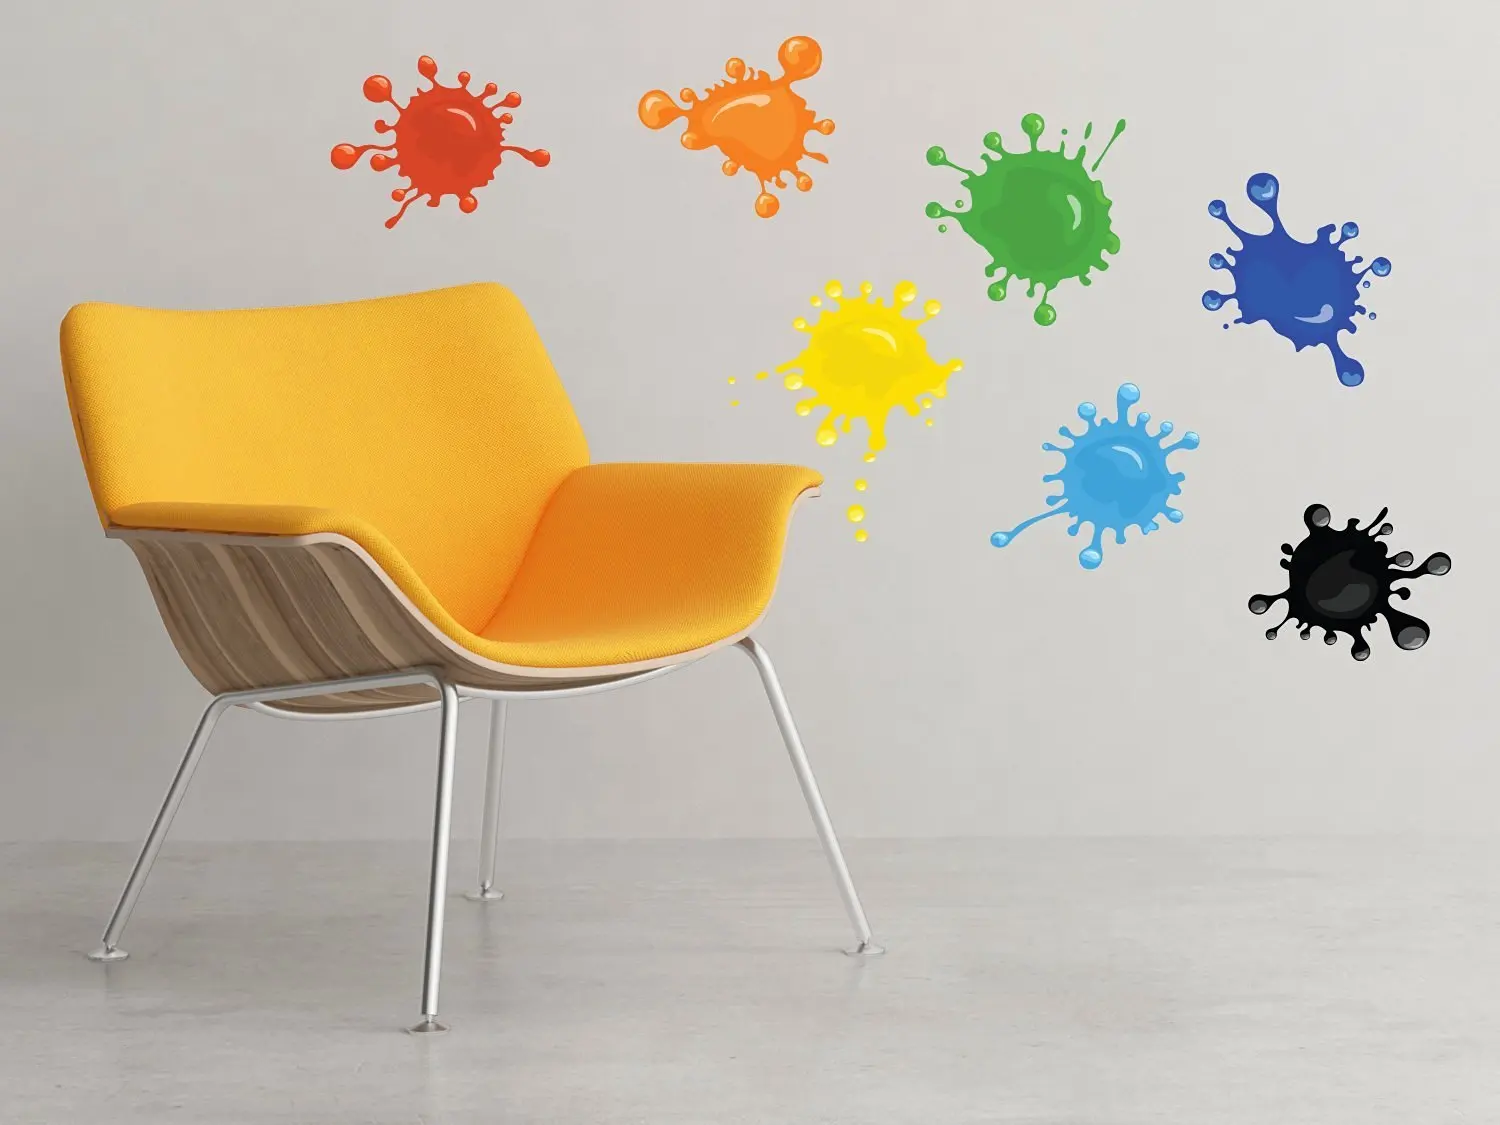 Cheap Wall Paint Decals Find Wall Paint Decals Deals On Line At